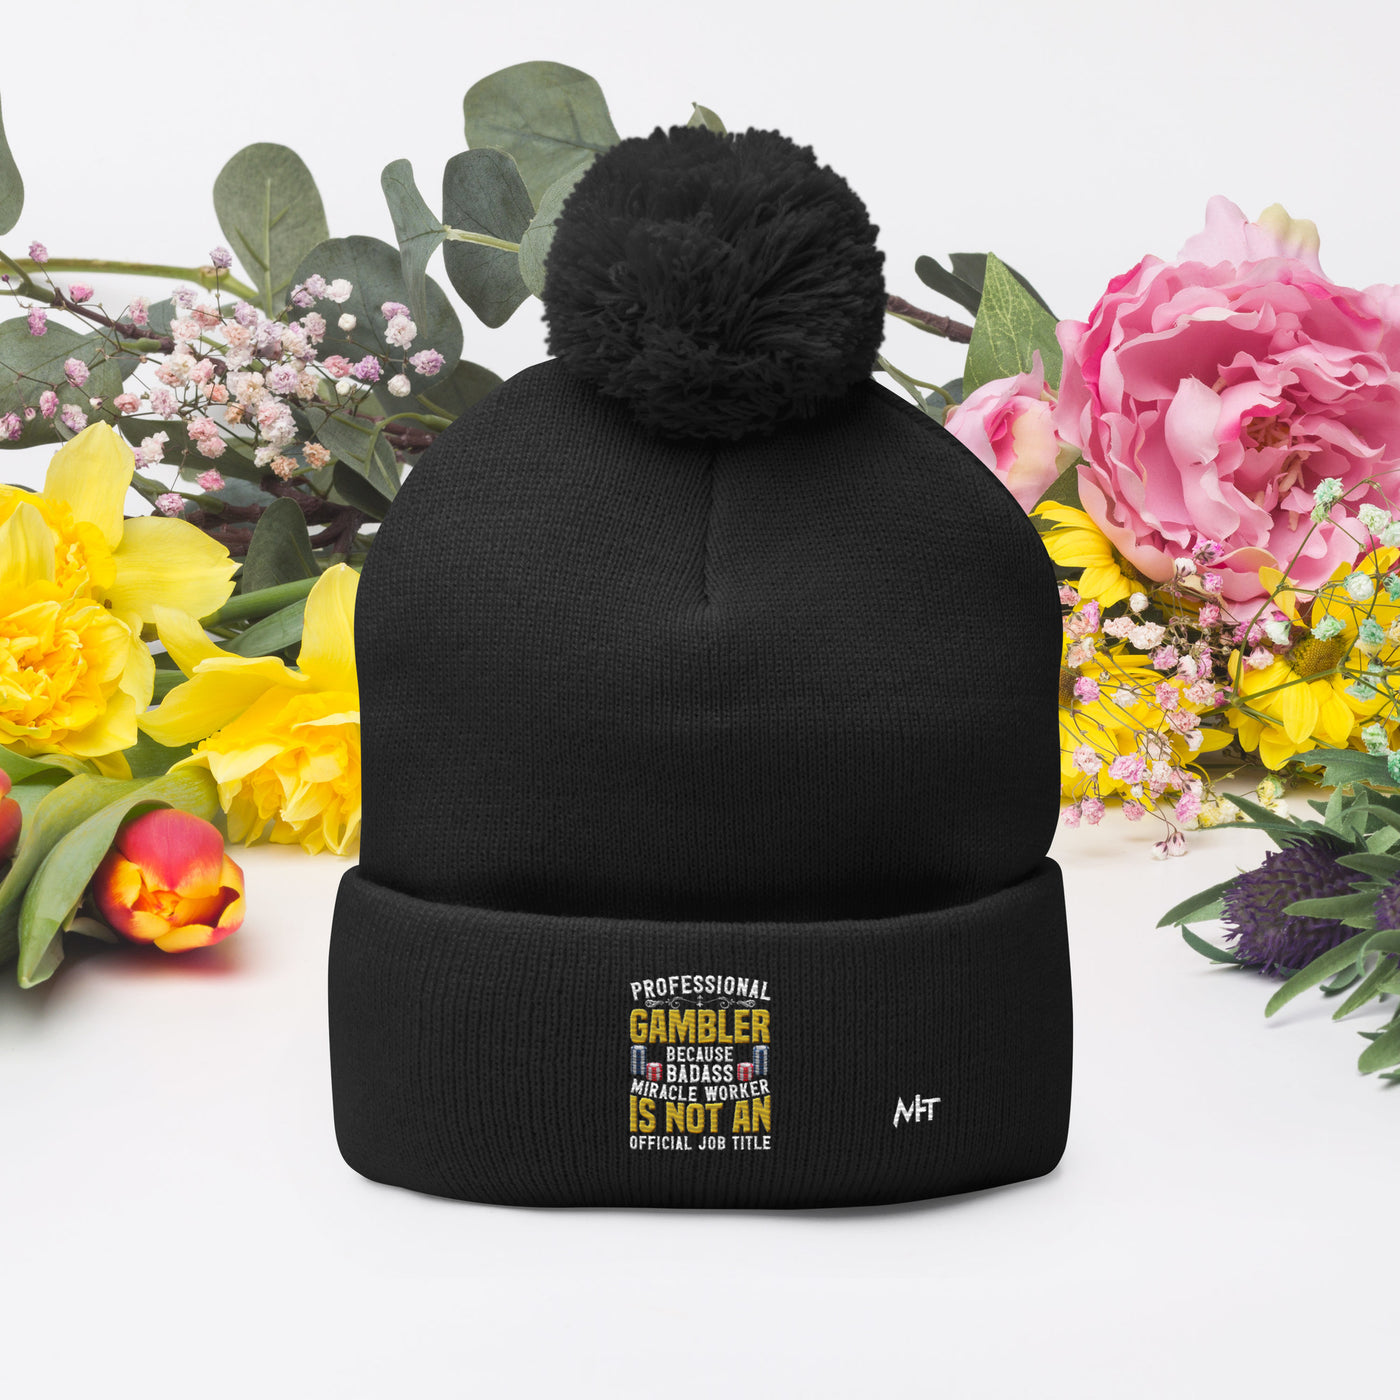 Professional Gambler because Badass Miracle Worker is an official Job Title - Pom-Pom Beanie